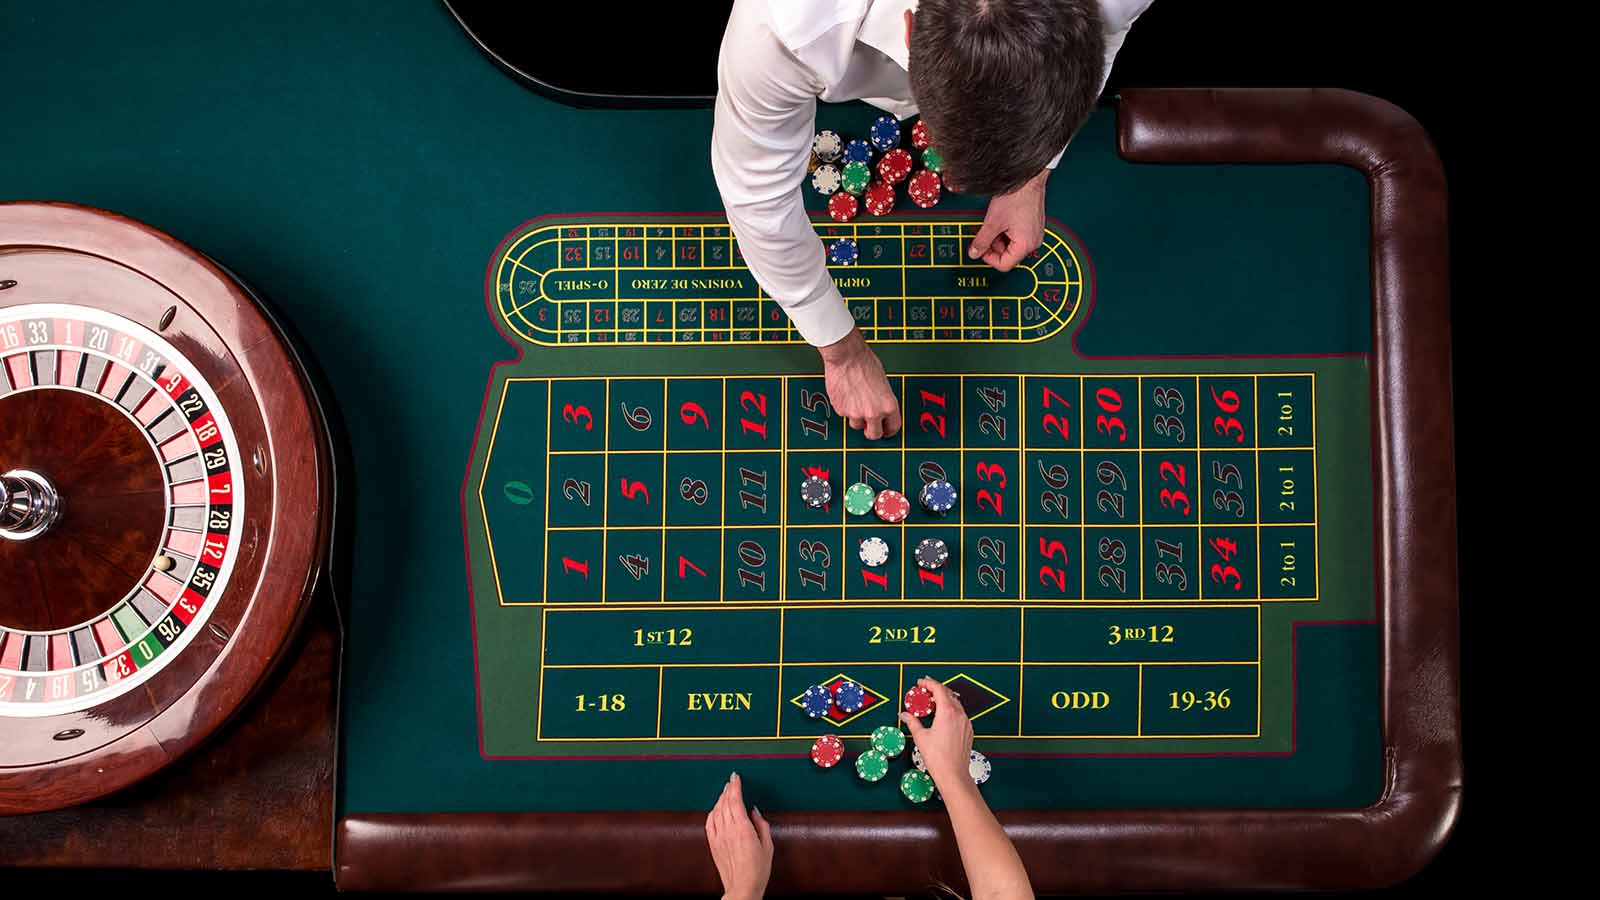 How to play roulette: Strategies, odds and picking your numbers